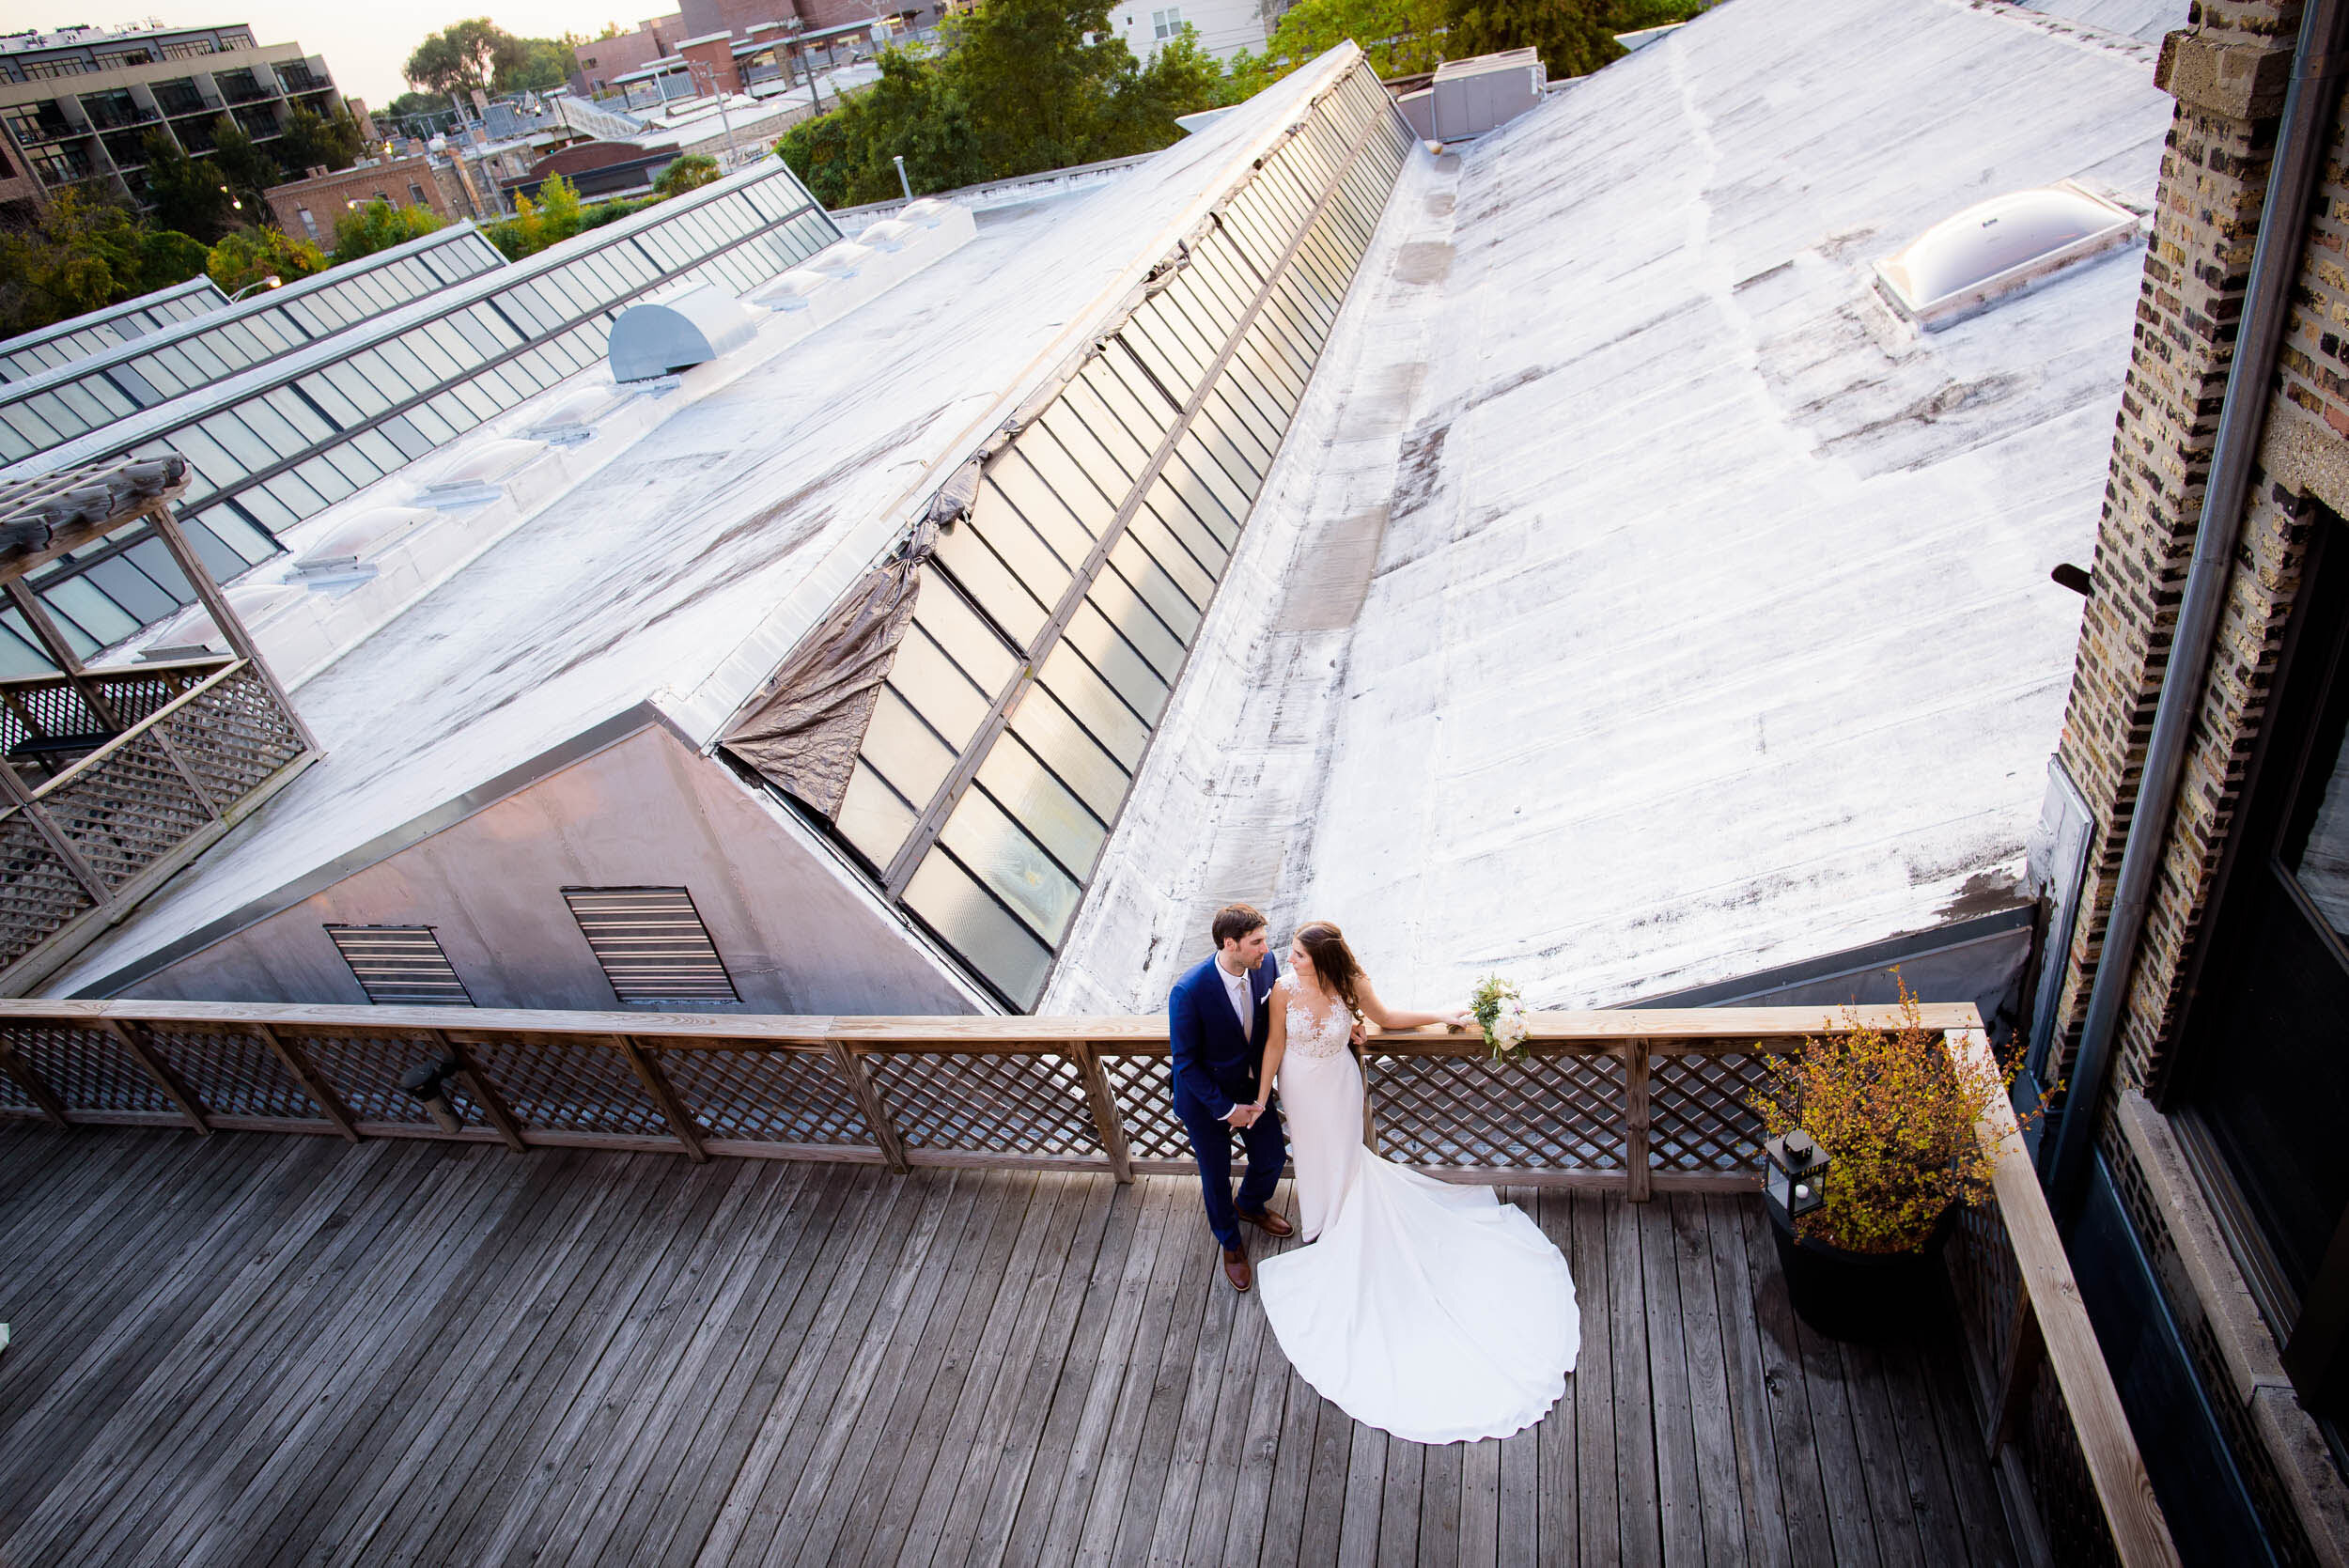 Creative fun photo of bride and groom: Ravenswood Event Center Chicago wedding captured by J. Brown Photography.  